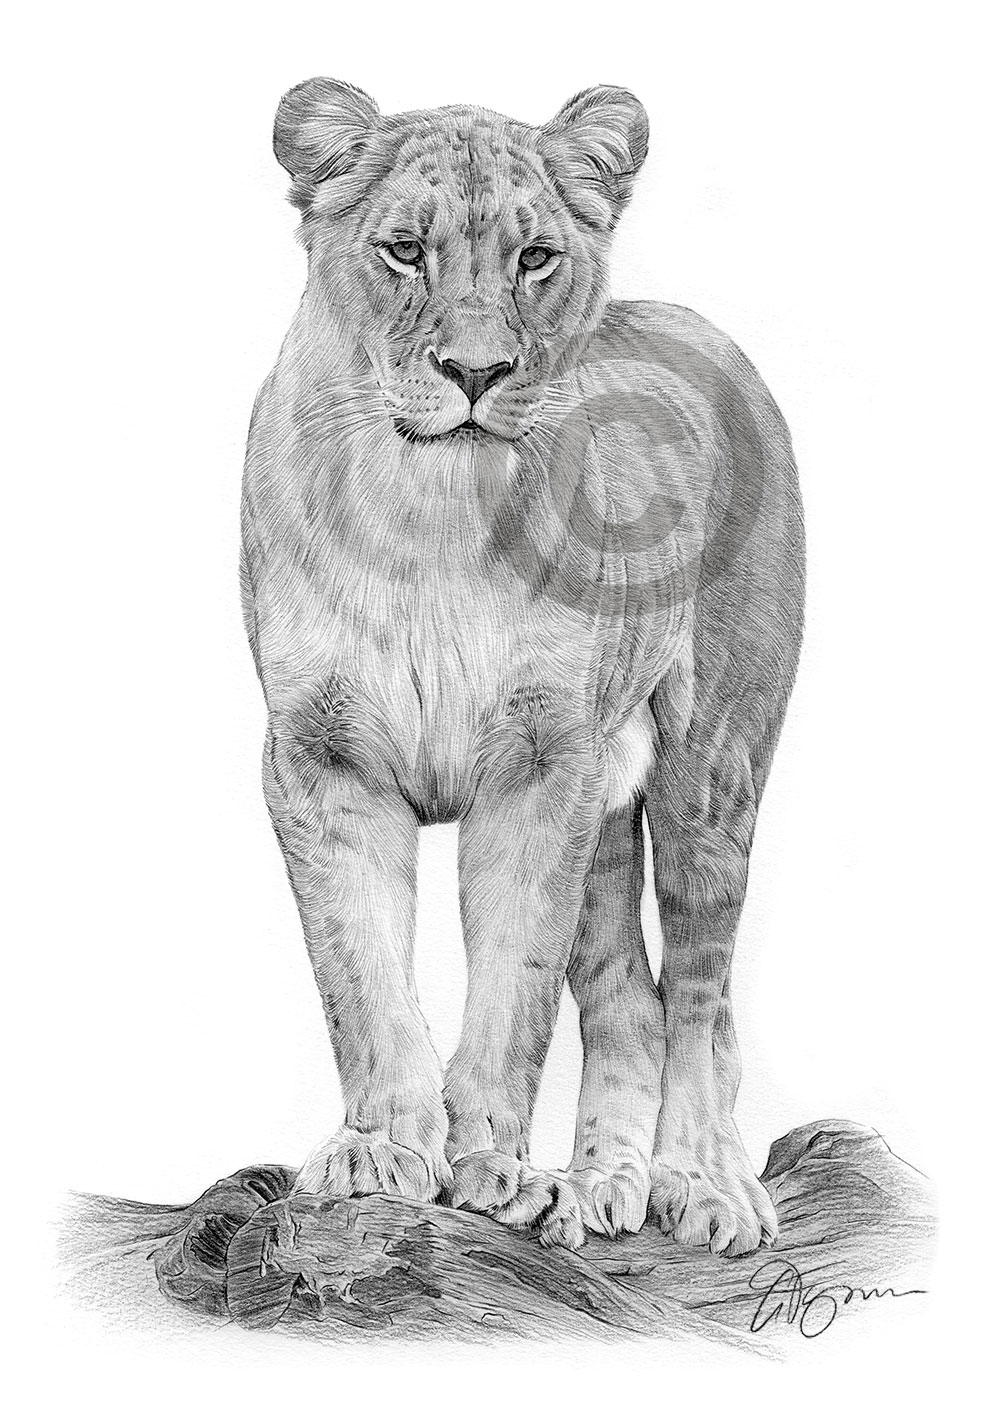 Pencil drawing of a young lioness by UK artist Gary Tymon